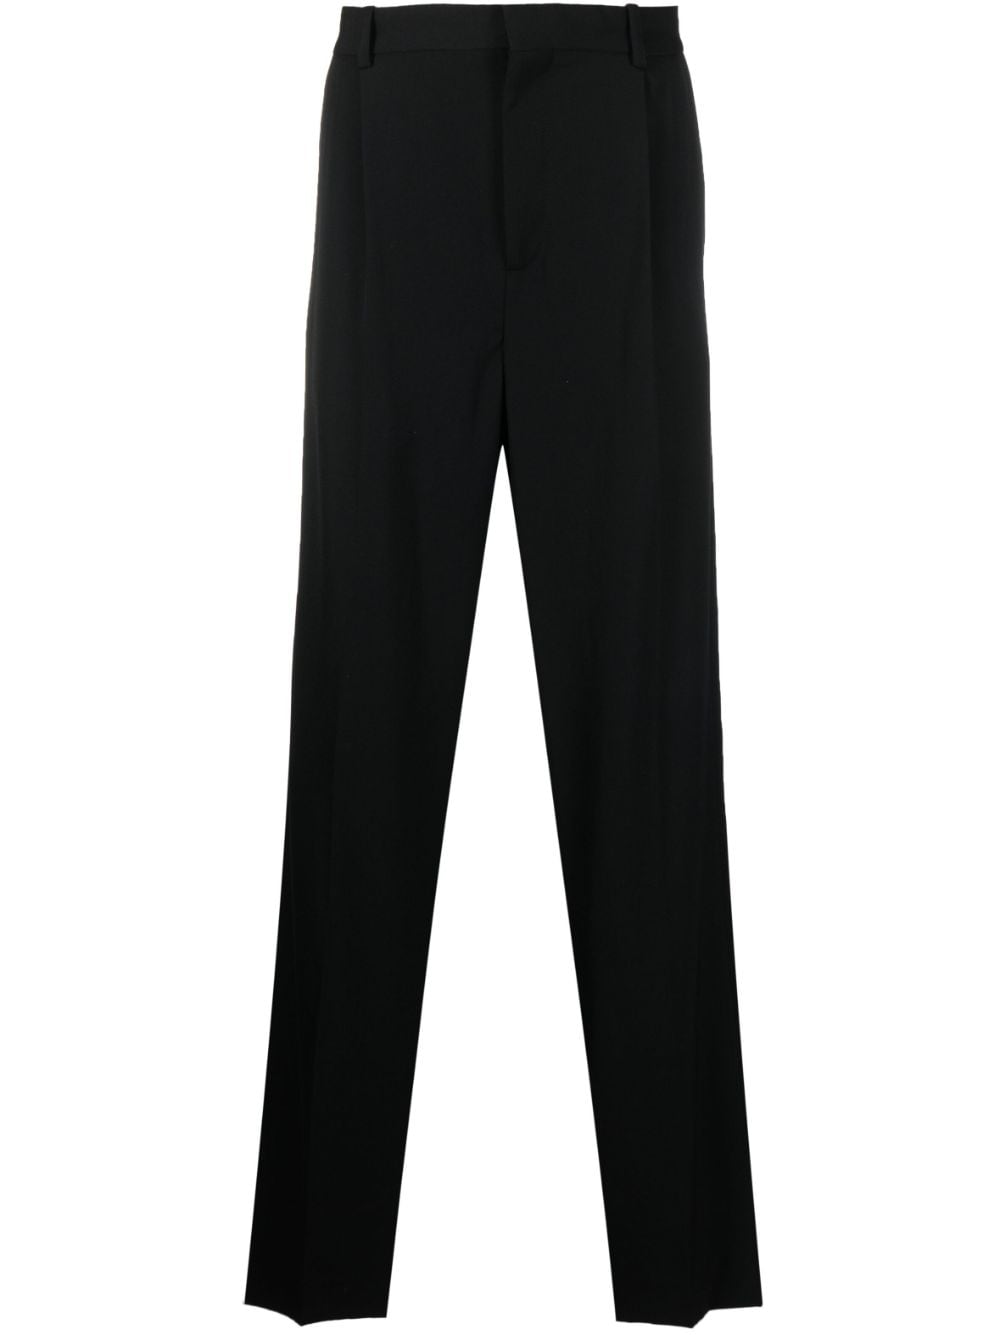 Botter BOTTER- Wool Classic Trousers